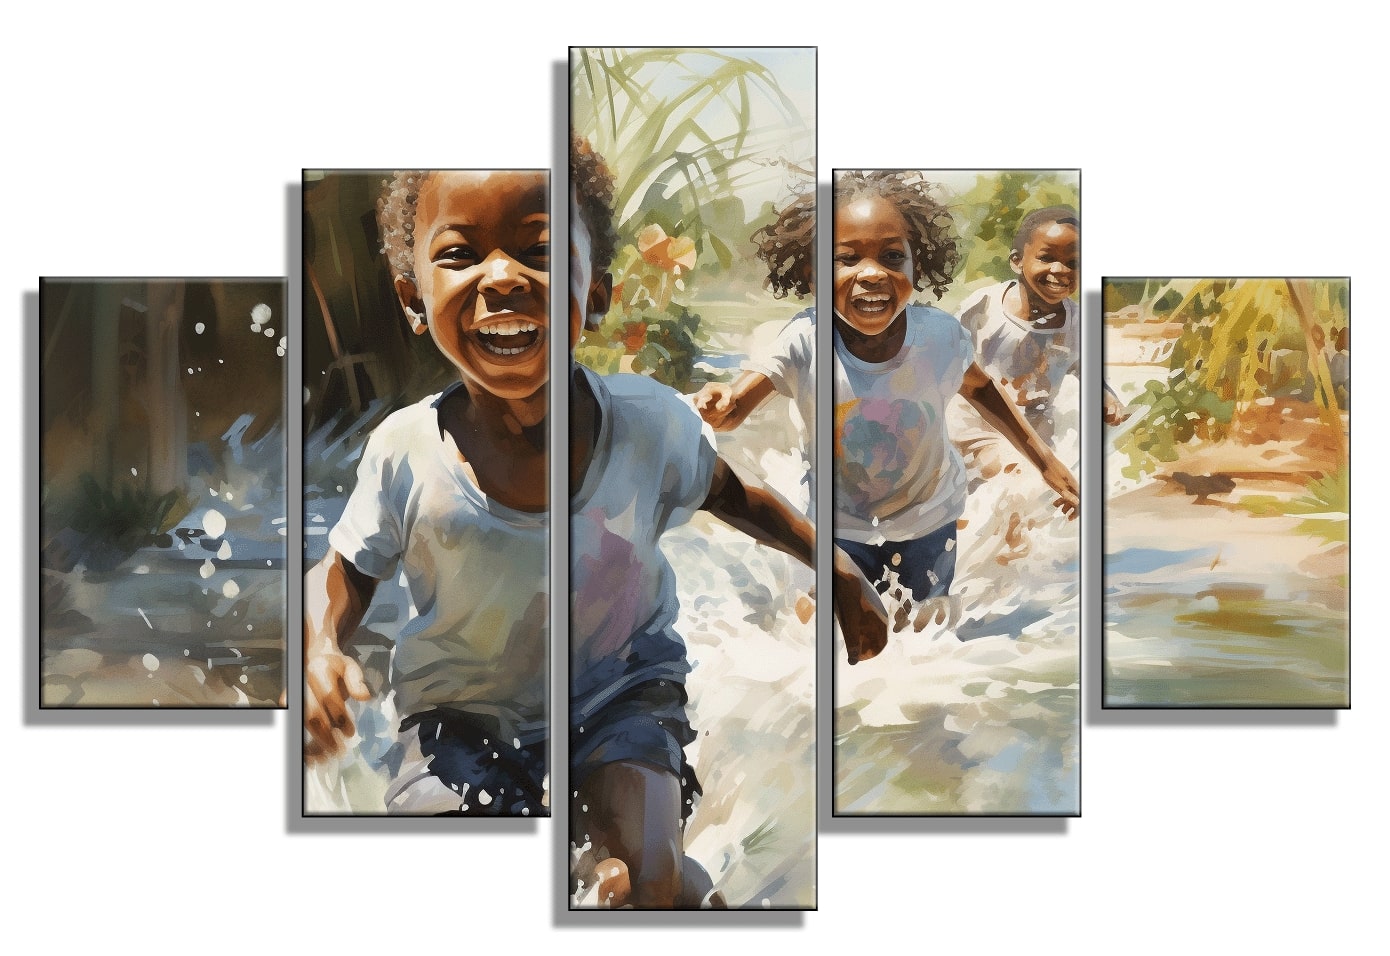 Children Laughing in Water Painting - 40x60 inches